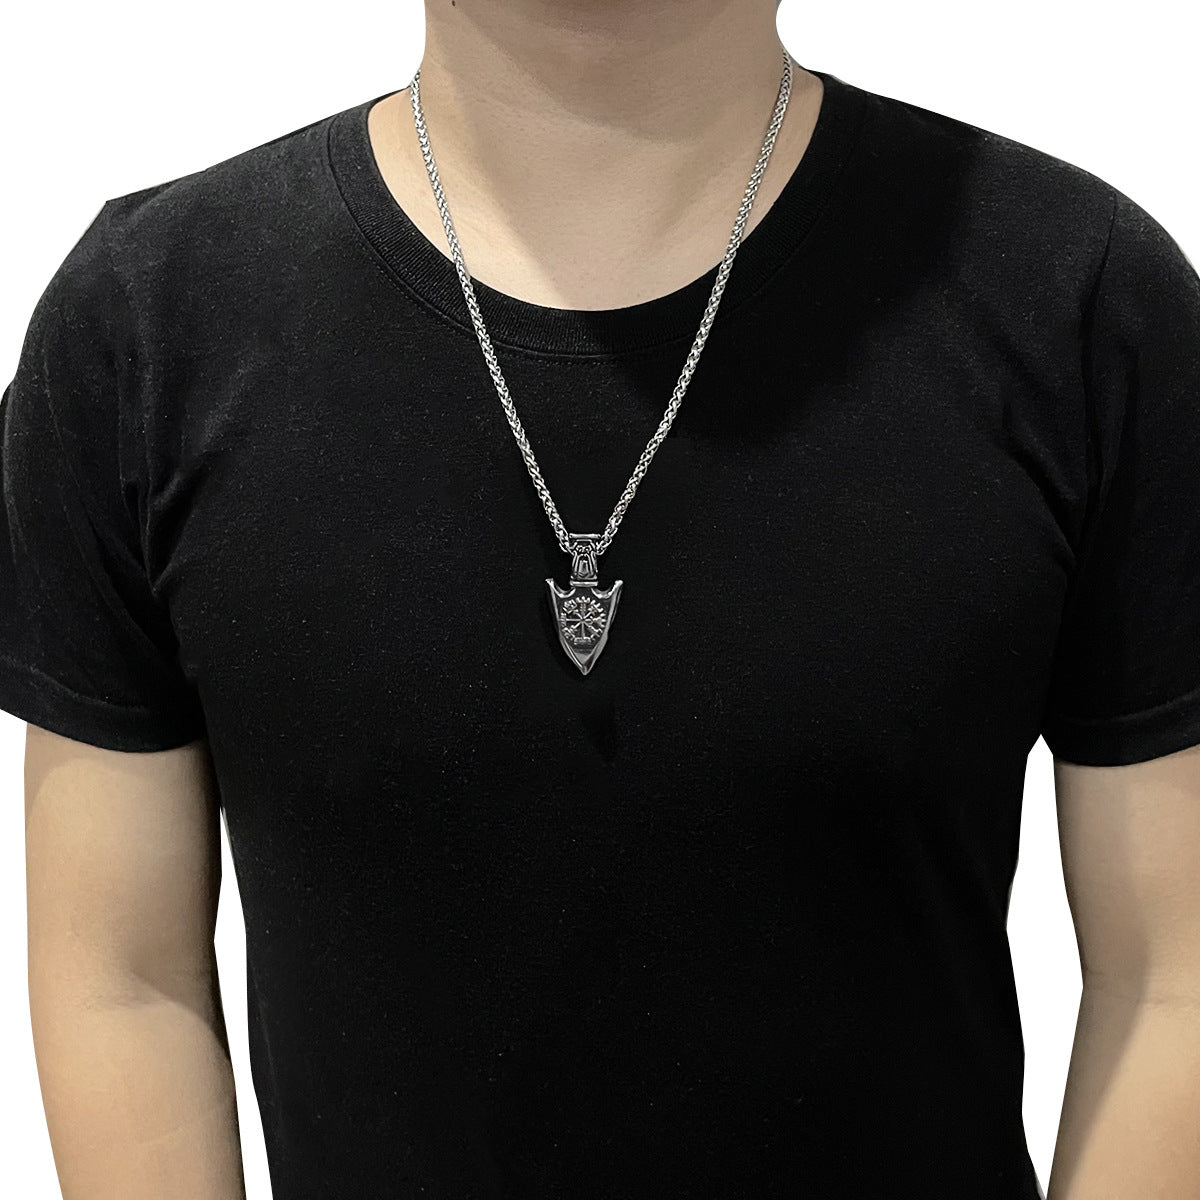 Hip Hop Necklace Stainless Steel Shield Pendant For Men